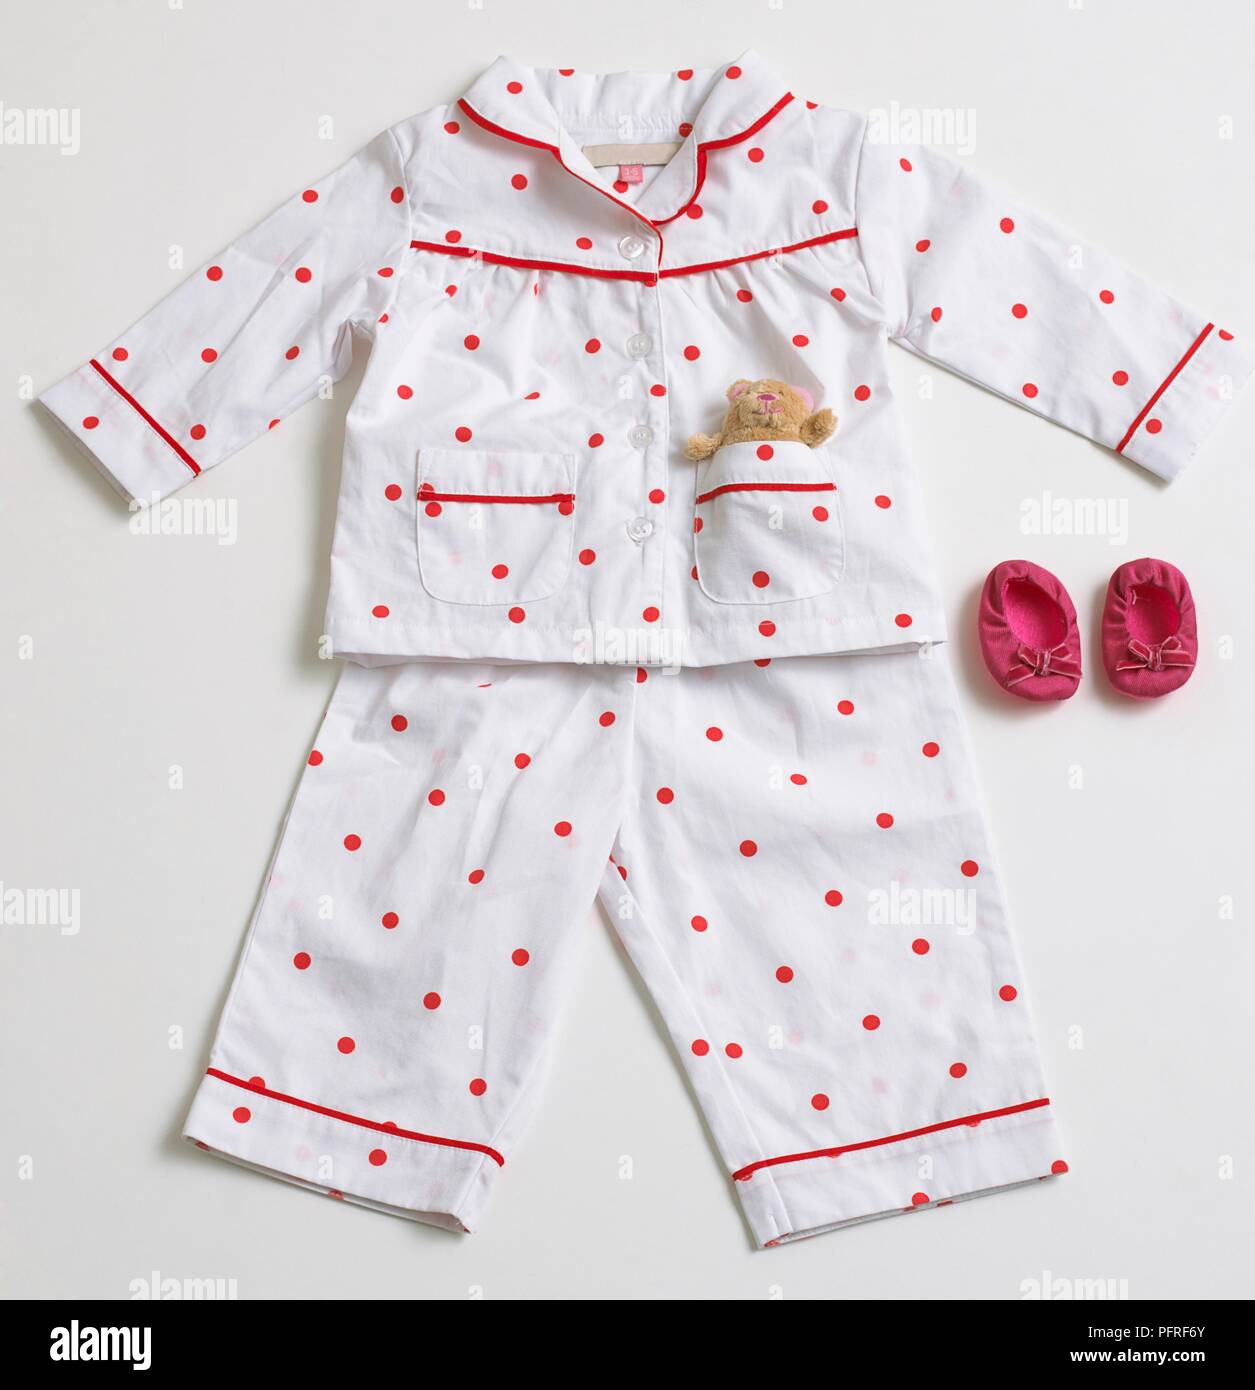 Childrens Pyjamas High Resolution Stock Photography And Images Alamy